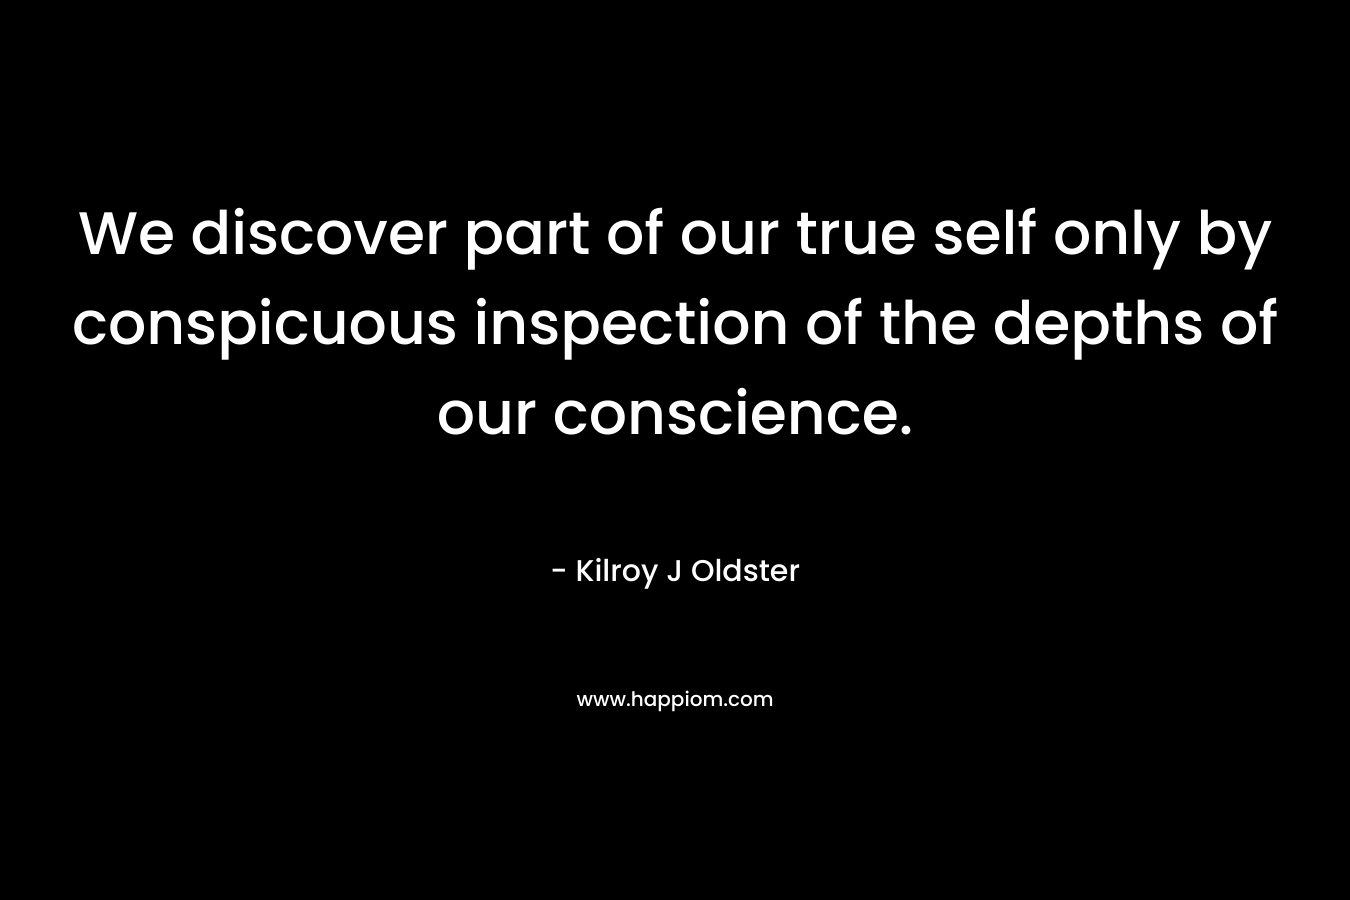 We discover part of our true self only by conspicuous inspection of the depths of our conscience. – Kilroy J Oldster